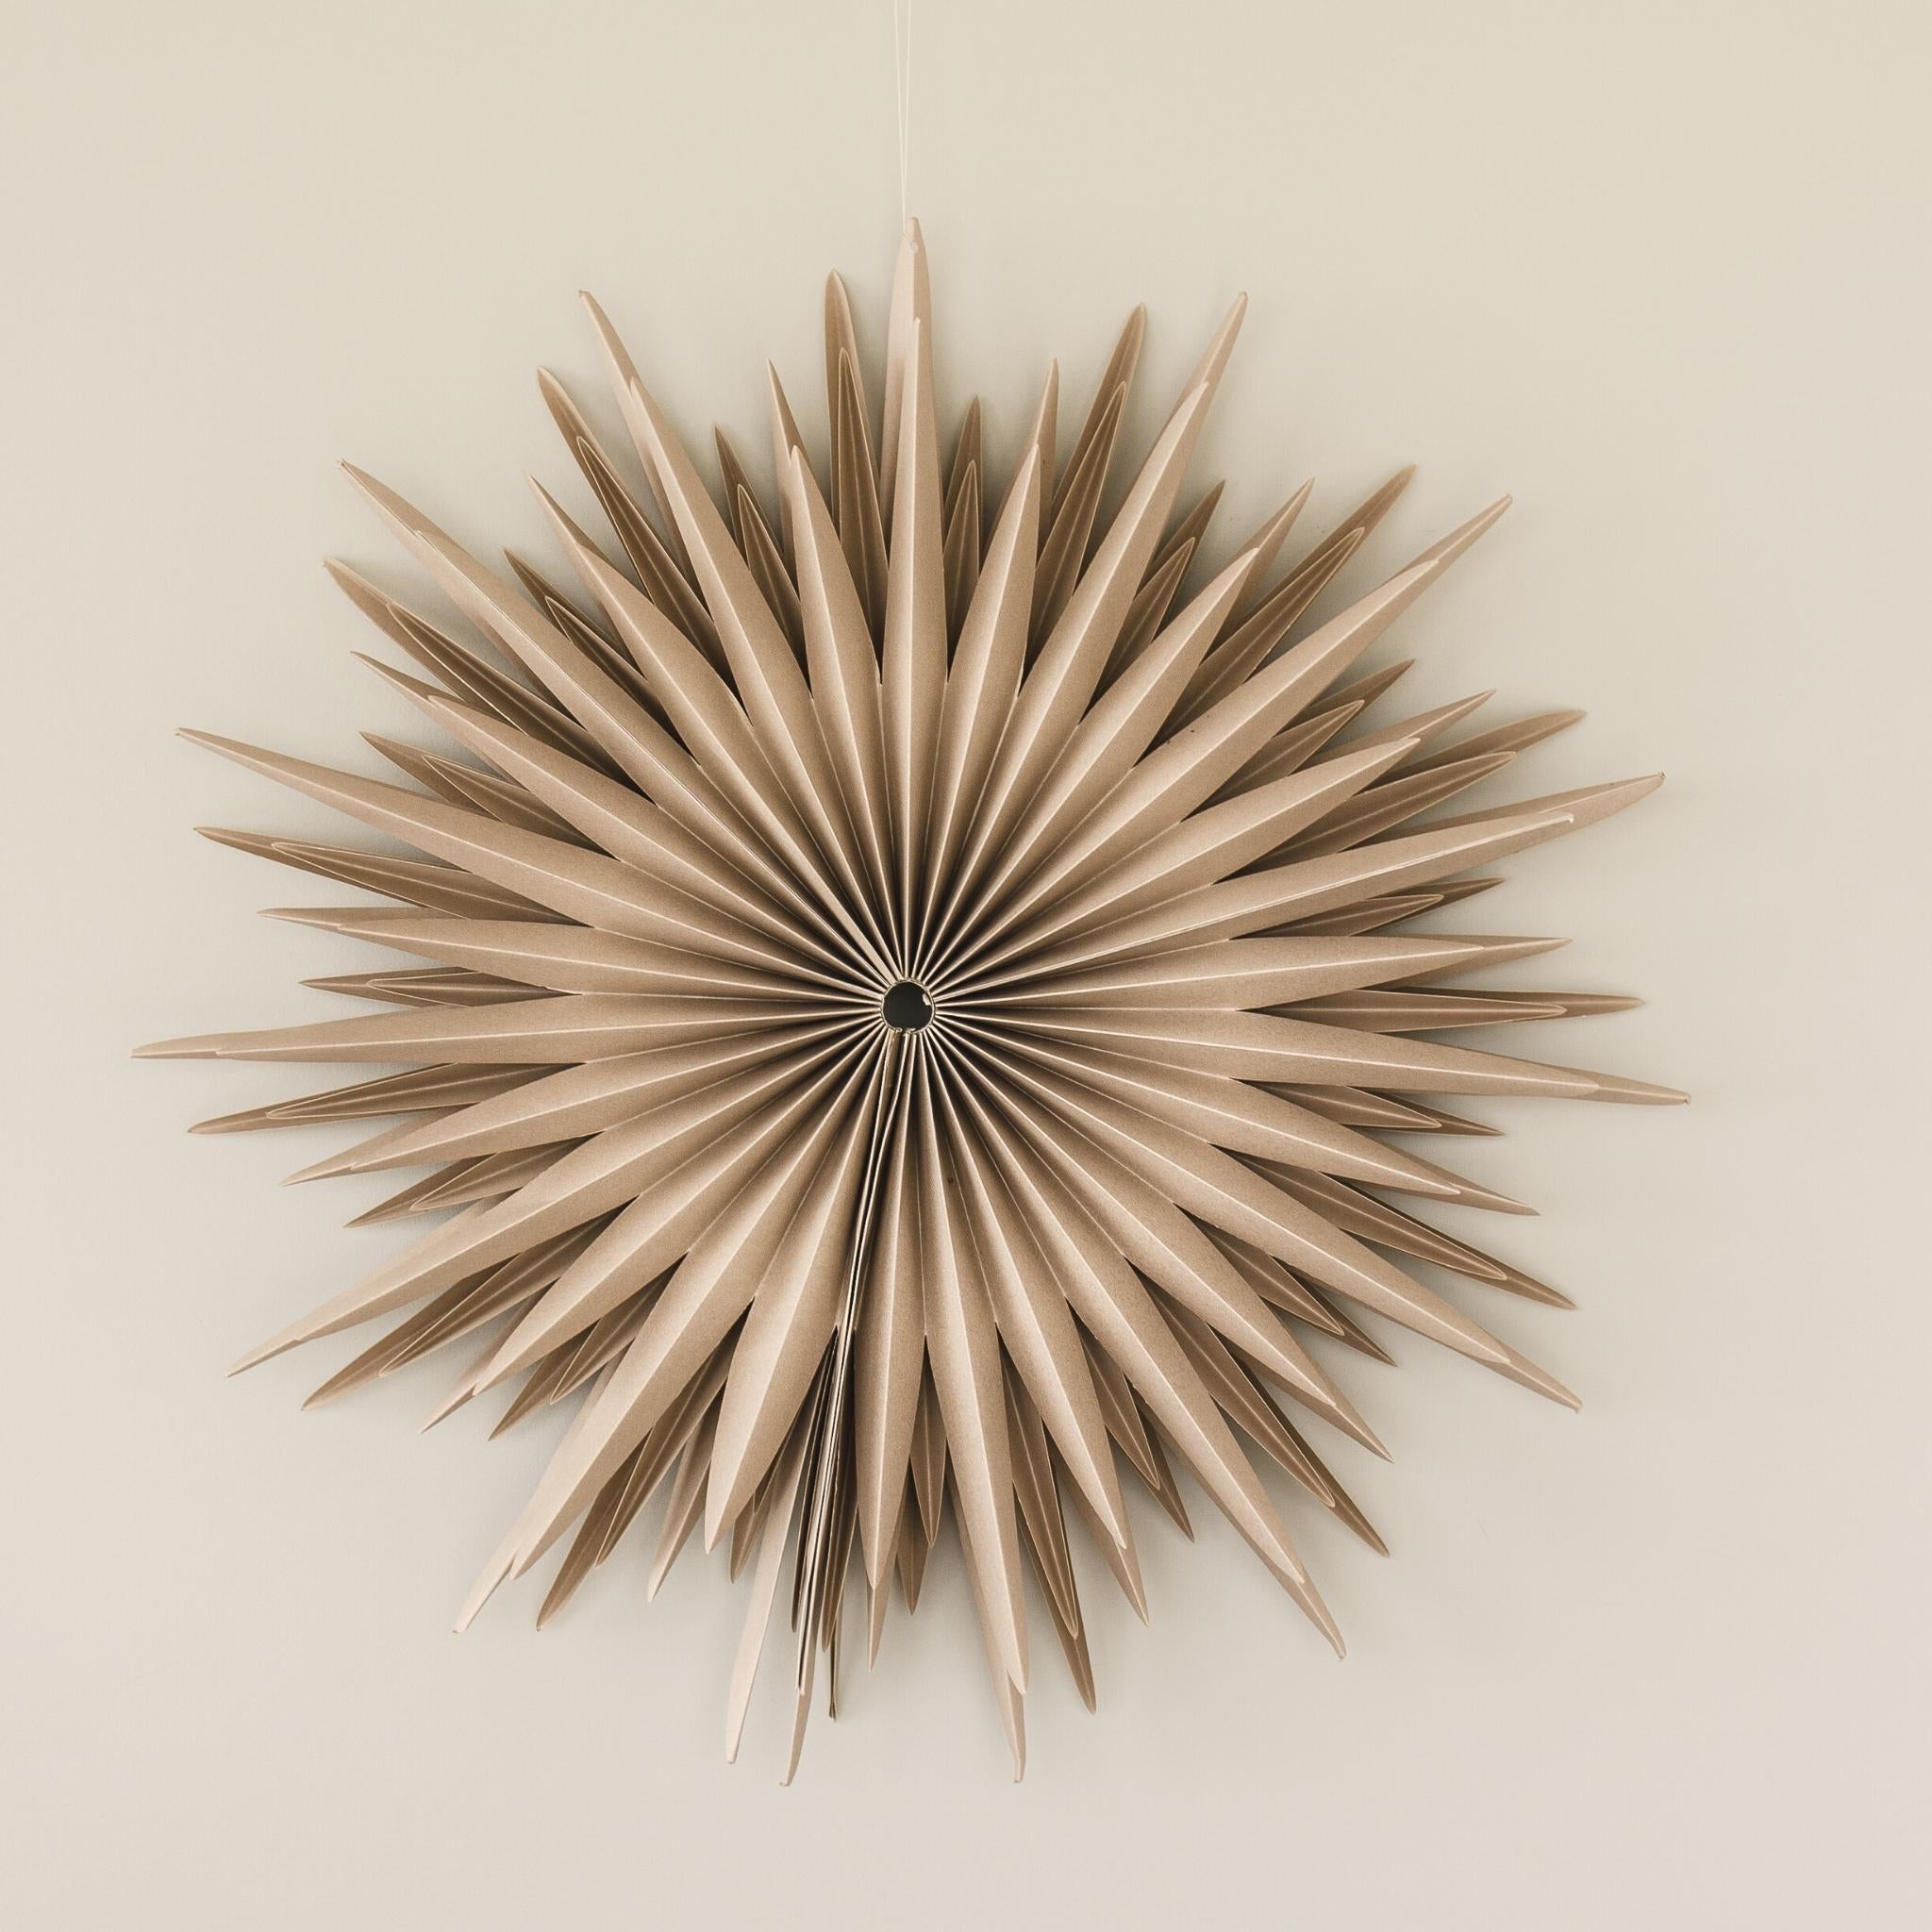 Almond Latte paper Star wall hanging in 50cm diameter hanging on a beige wall